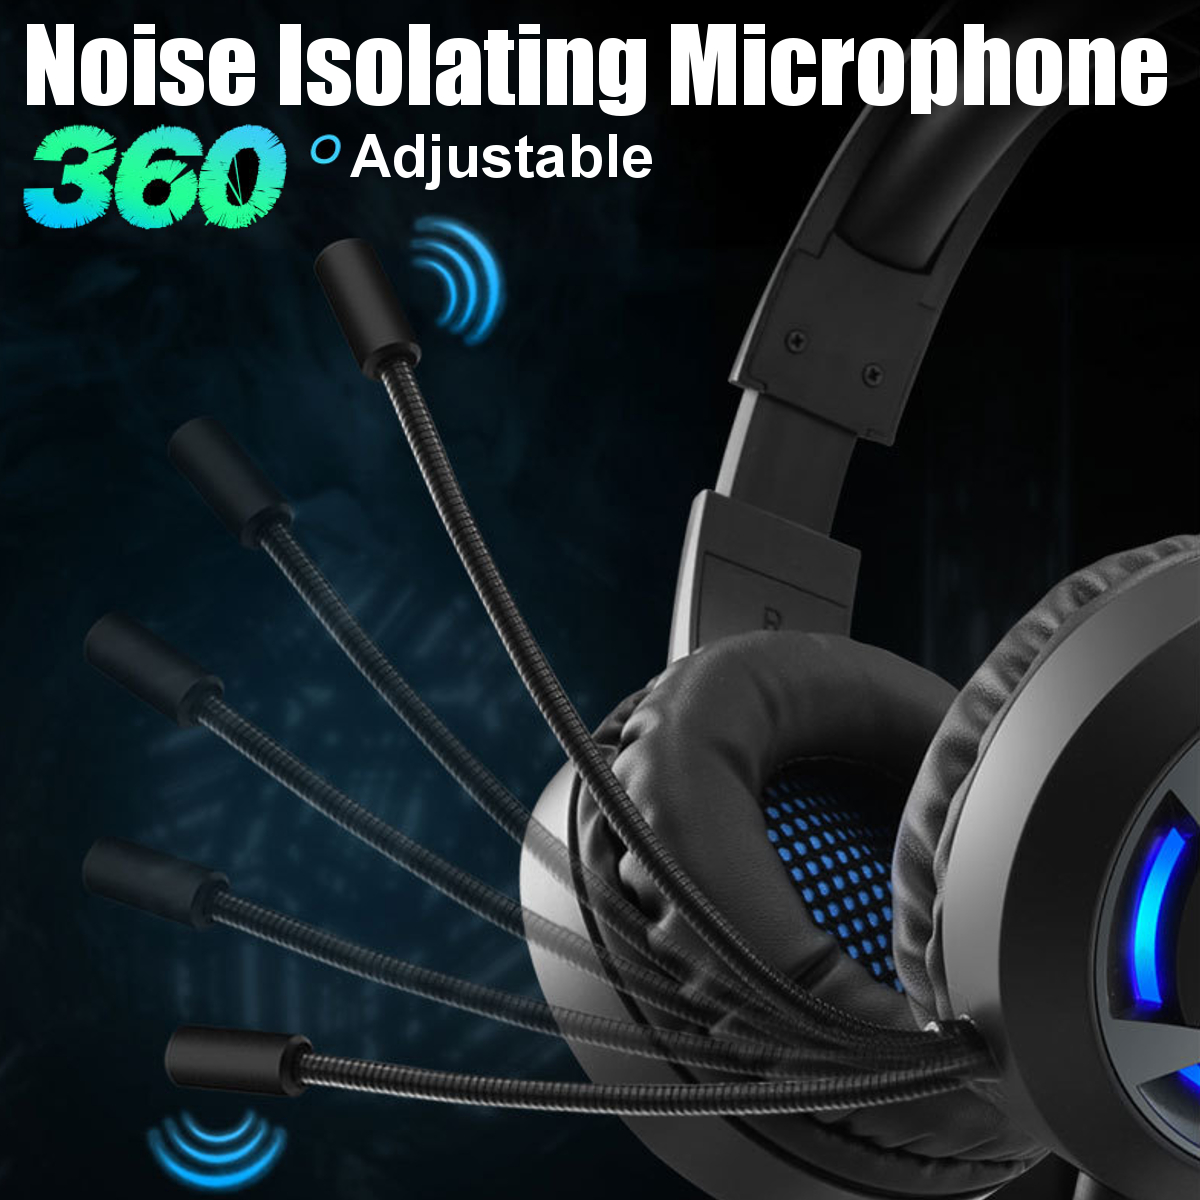 Find Bakeey Wired Headphones Stereo Bass Surround Gaming Headset for PS4 New for Xbox One PC with Mic for Sale on Gipsybee.com with cryptocurrencies